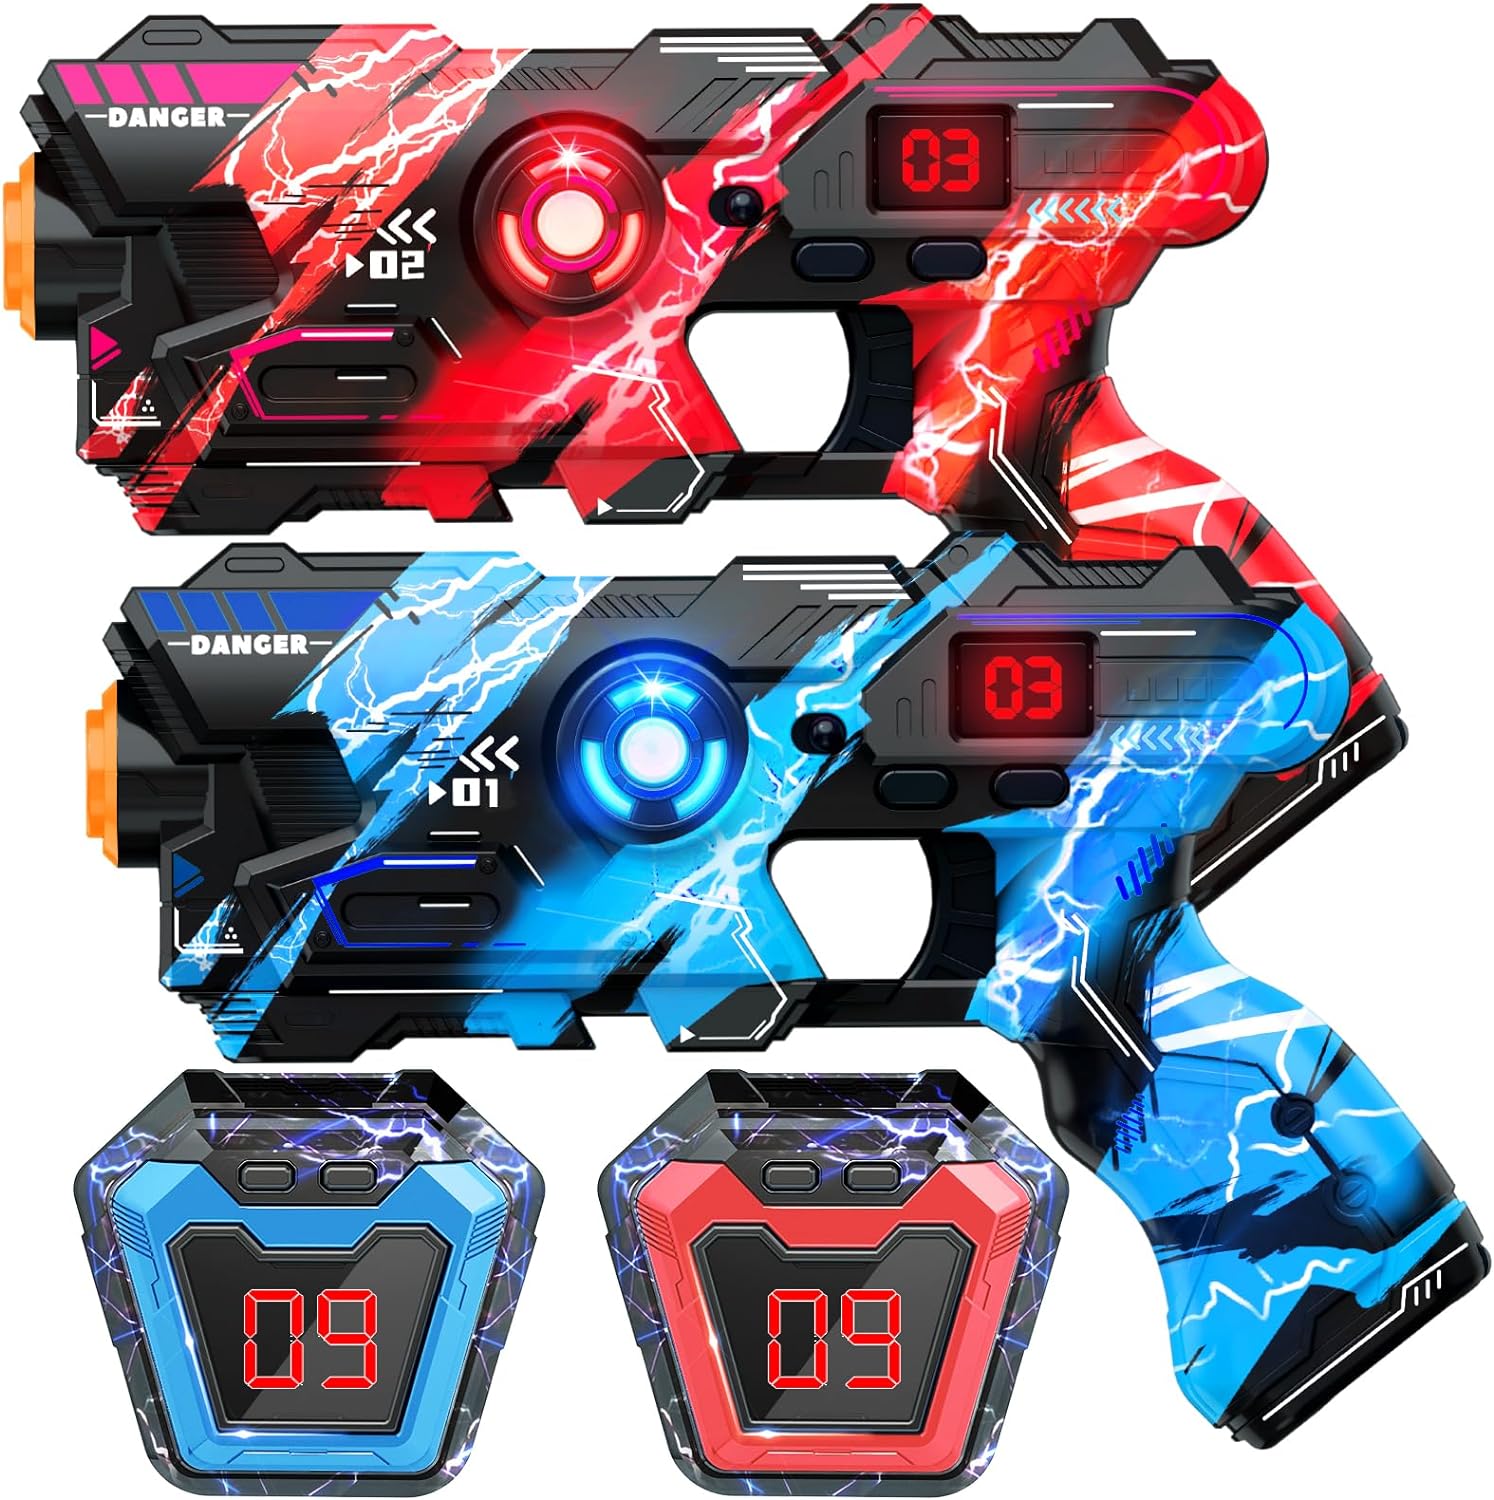 OSALON Laser Tag Guns Set of 2 with Digital LED Score Display Vest Multi-Functional Laser Tag Fun Indoor&Outdoor Toys for Kids Ages 8 9 10 11 12+ Years Old Boys Girls Teens Adults Birthday Gift